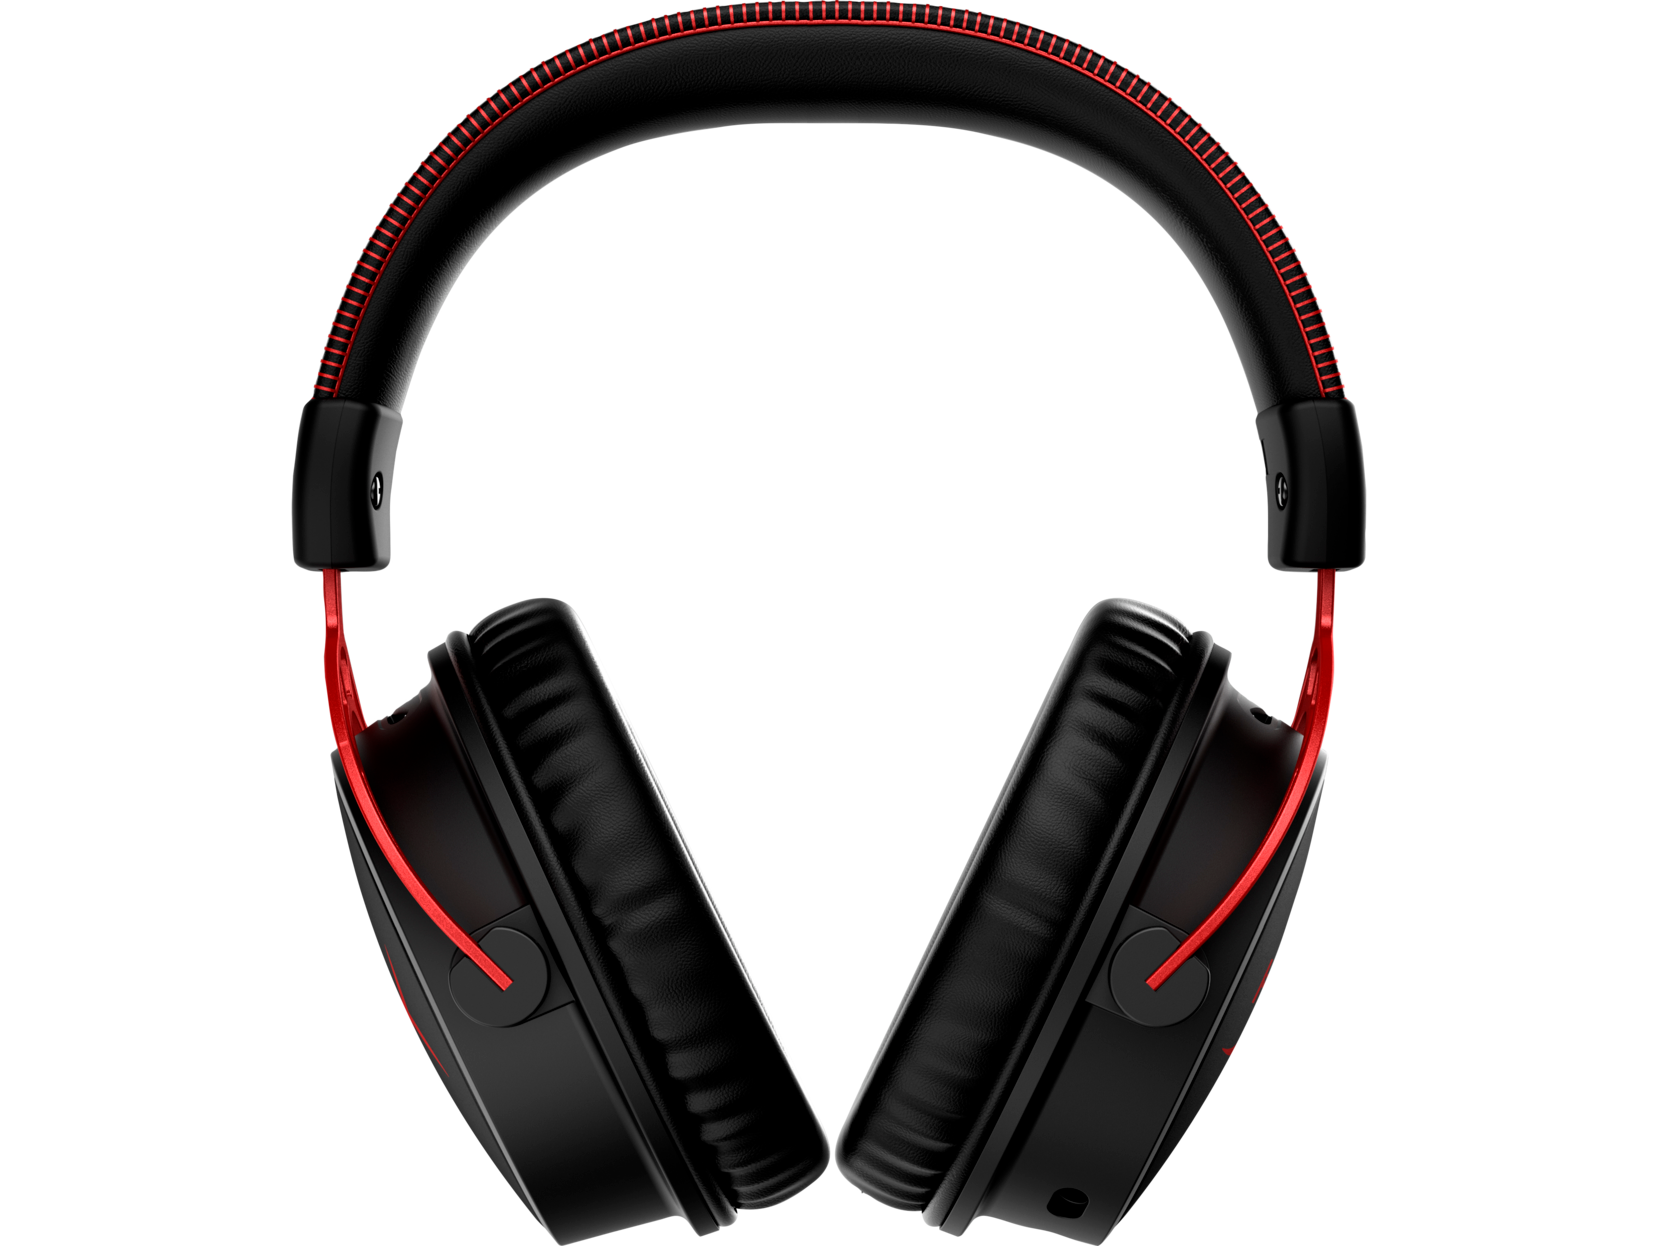 HyperX Cloud Alpha Wireless Over-Ear Gaming Headset, Red - image 1 of 7